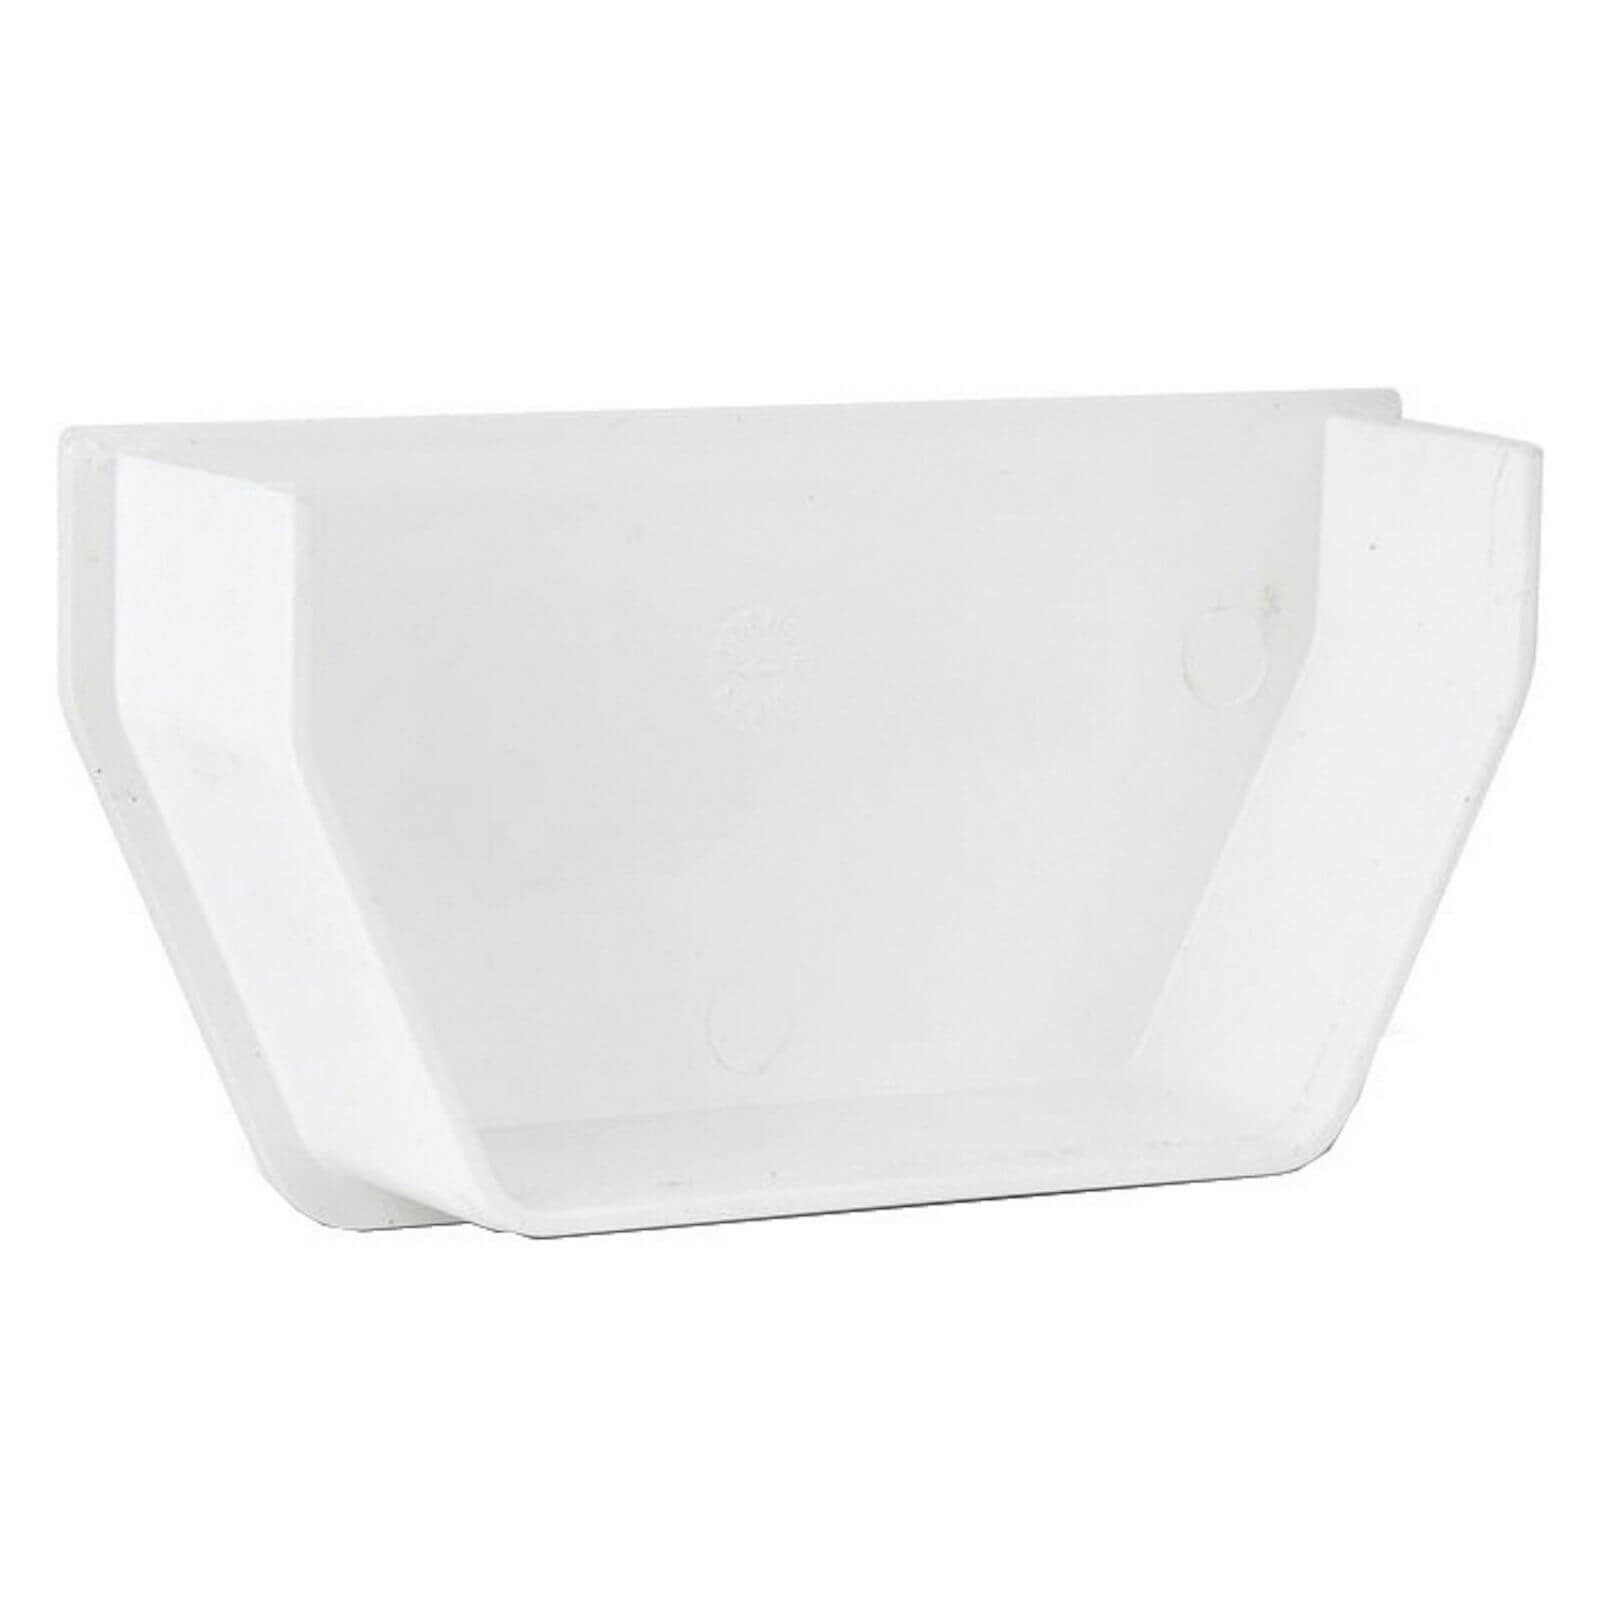 Photo of Polypipe Square Stop End Internal - 112mm - White